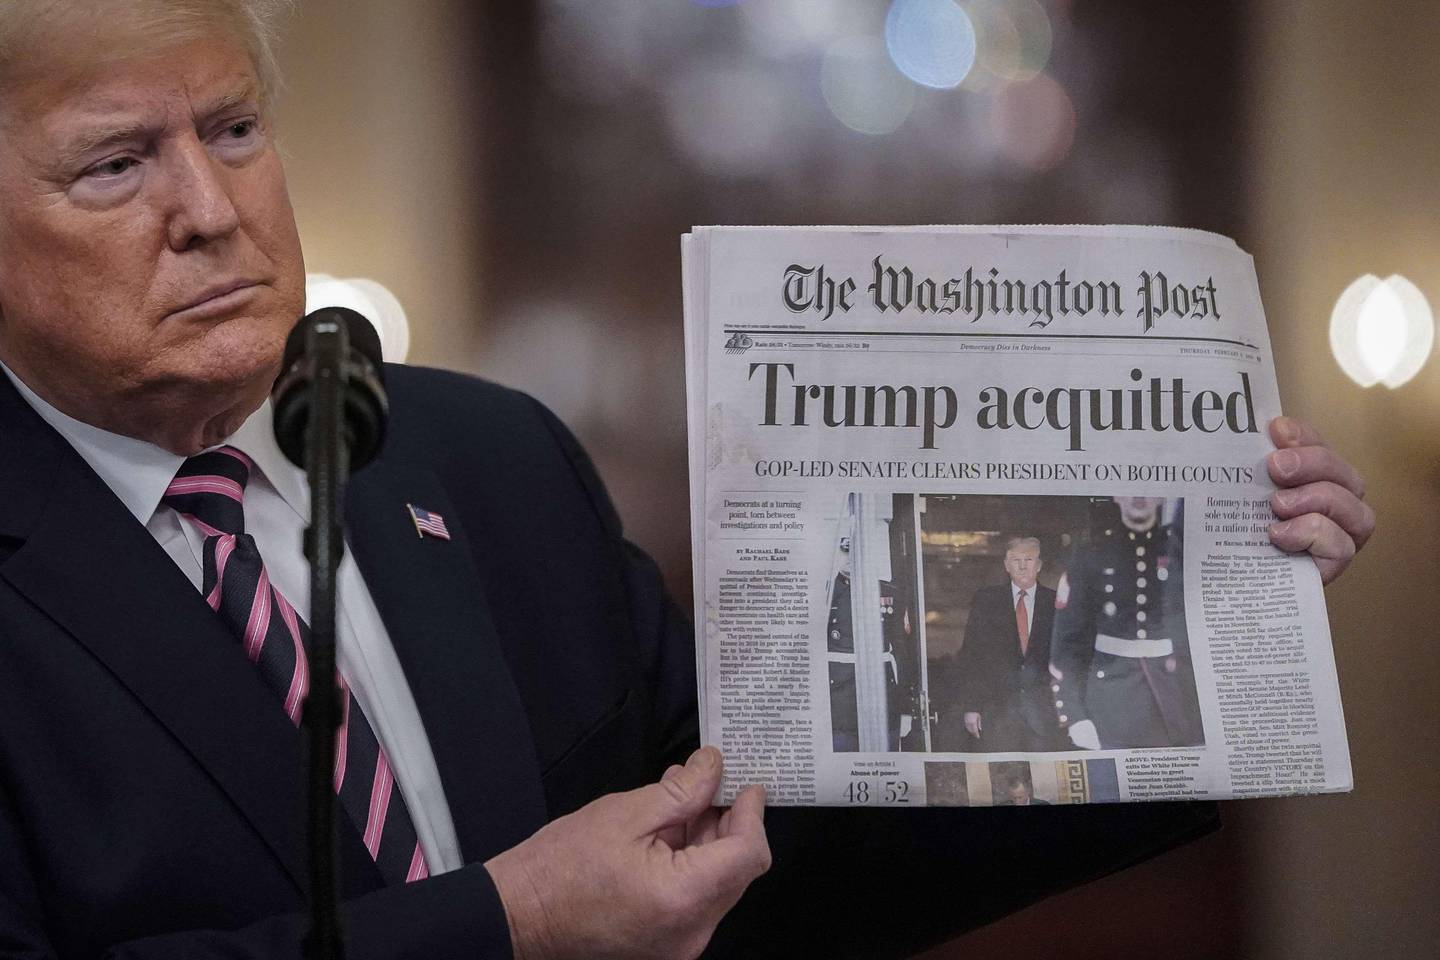 WASHINGTON, DC - FEBRUARY 06: U.S. President Donald Trump holds a copy of The Washington Post as he speaks in the East Room of the White House one day after the U.S. Senate acquitted on two articles of impeachment, ion February 6, 2020 in Washington, DC. After five months of congressional hearings and investigations about President Trumps dealings with Ukraine, the U.S. Senate formally acquitted the president on Wednesday of charges that he abused his power and obstructed Congress.   Drew Angerer/Getty Images/AFP
== FOR NEWSPAPERS, INTERNET, TELCOS & TELEVISION USE ONLY ==